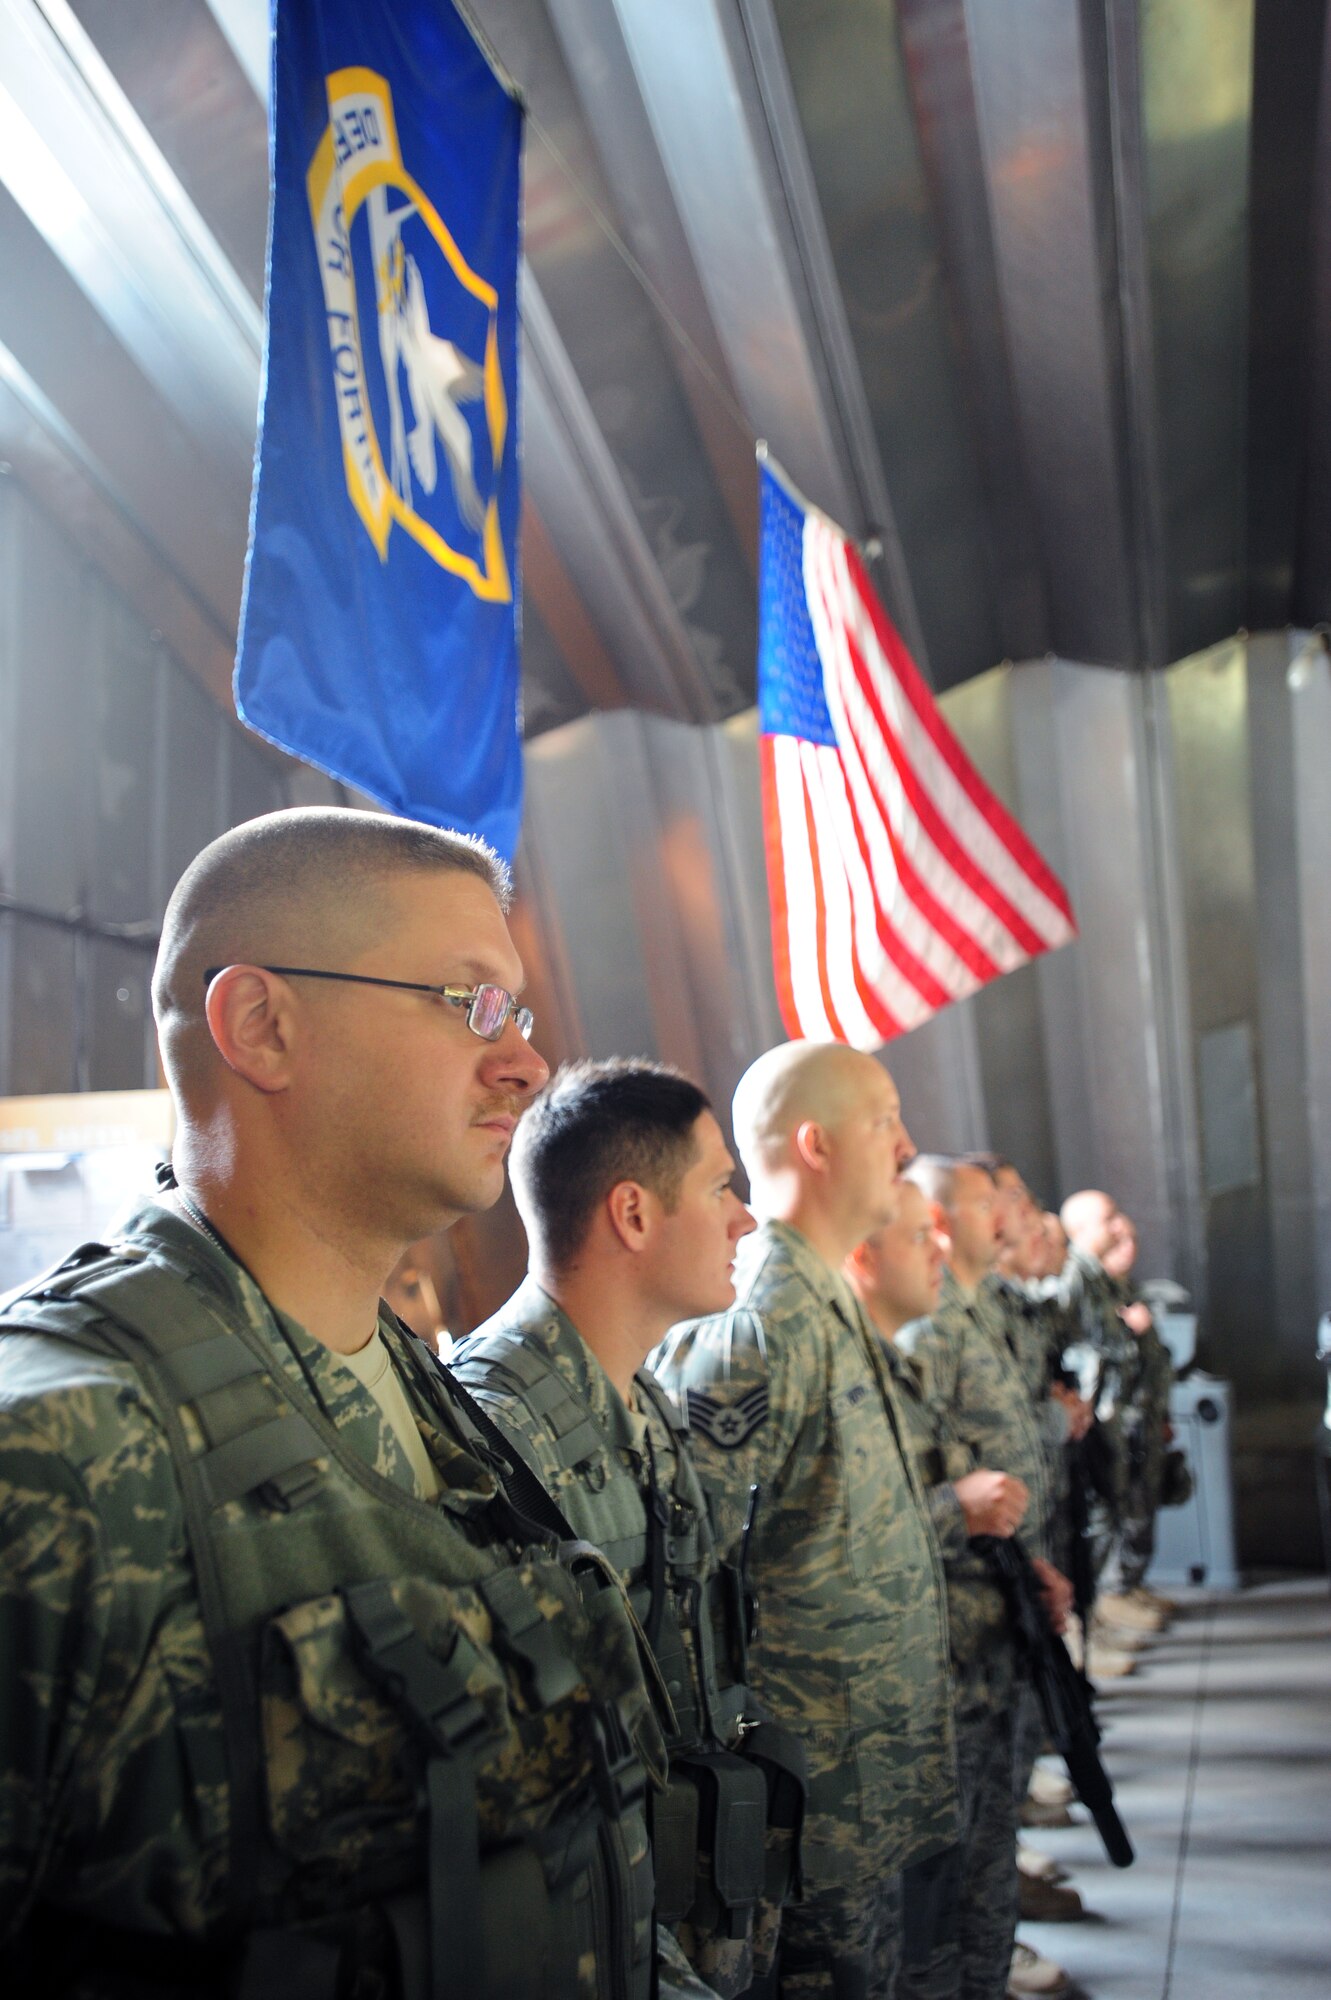 Tech. Sgt. Joe Klich, Staff Sgt. Nate Silvers, Staff Sgt. Jon Emmerich, Senior Airman Jonathon Jaeger and Staff Sgt. Michael Alvareaz, members of the 376th Expeditionary Security Forces Squadron, stand in formation at Transit Center at Manas, Kyrgyz Republic. These five members are joined by 26 of their Madison-based counterparts, from the 115th Security Forces Squadron, in providing perimeter and flight line defense at the base until their return home early next year. (Photo Courtesy)